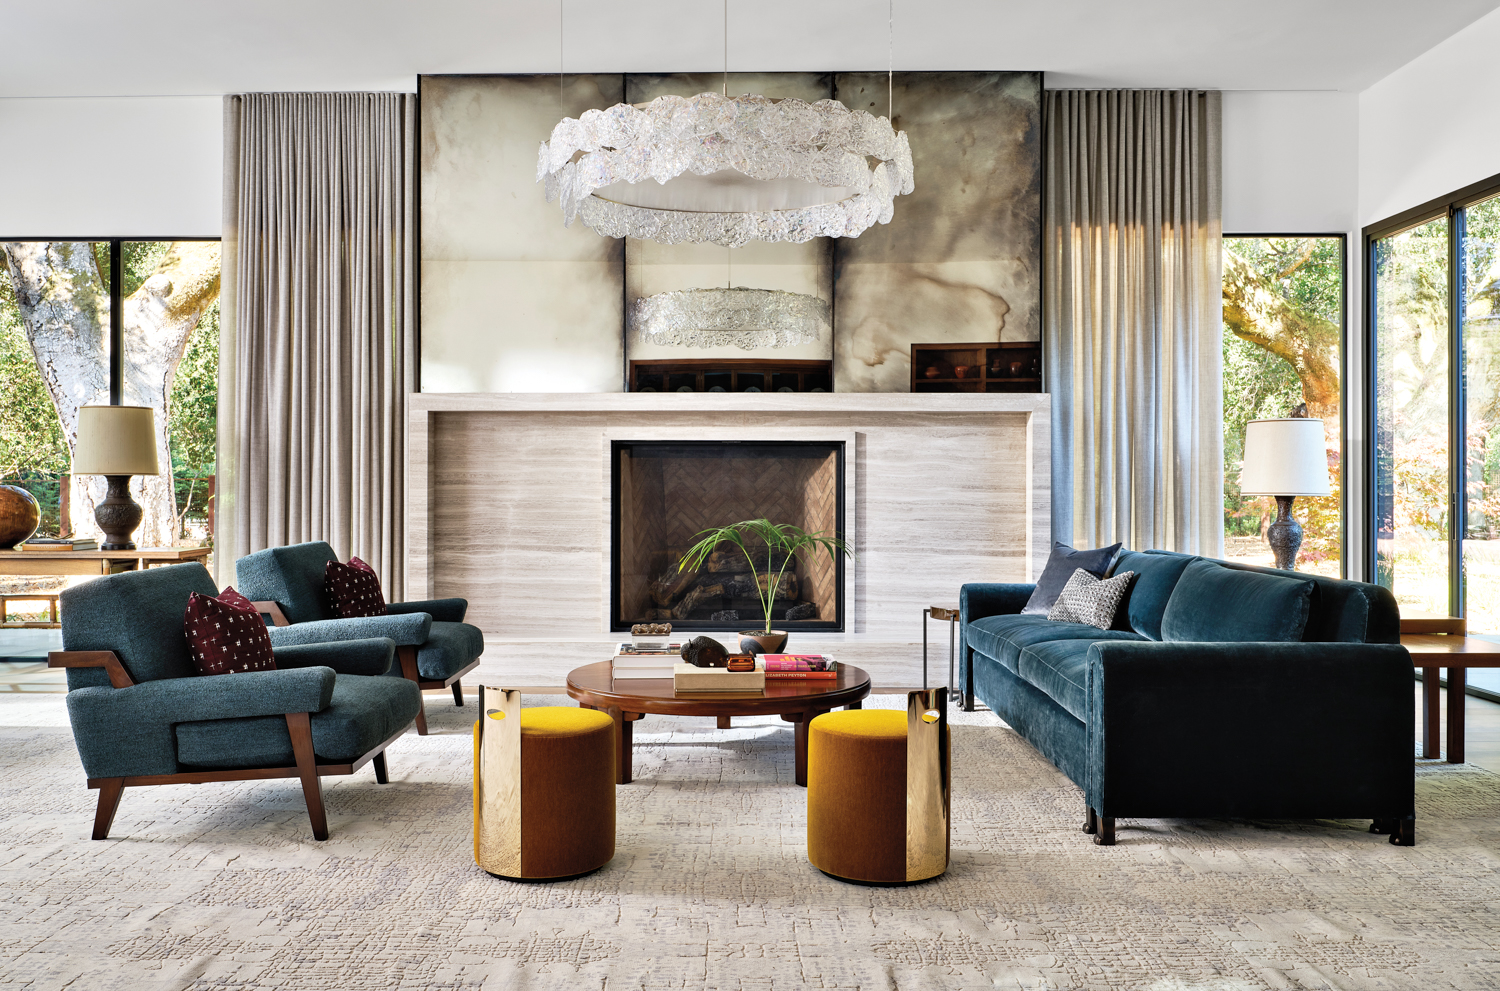 The Midcentury Home Of A Former Ford President Enters A New Era {The Midcentury Home Of A Former Ford President Enters A New Era} – English